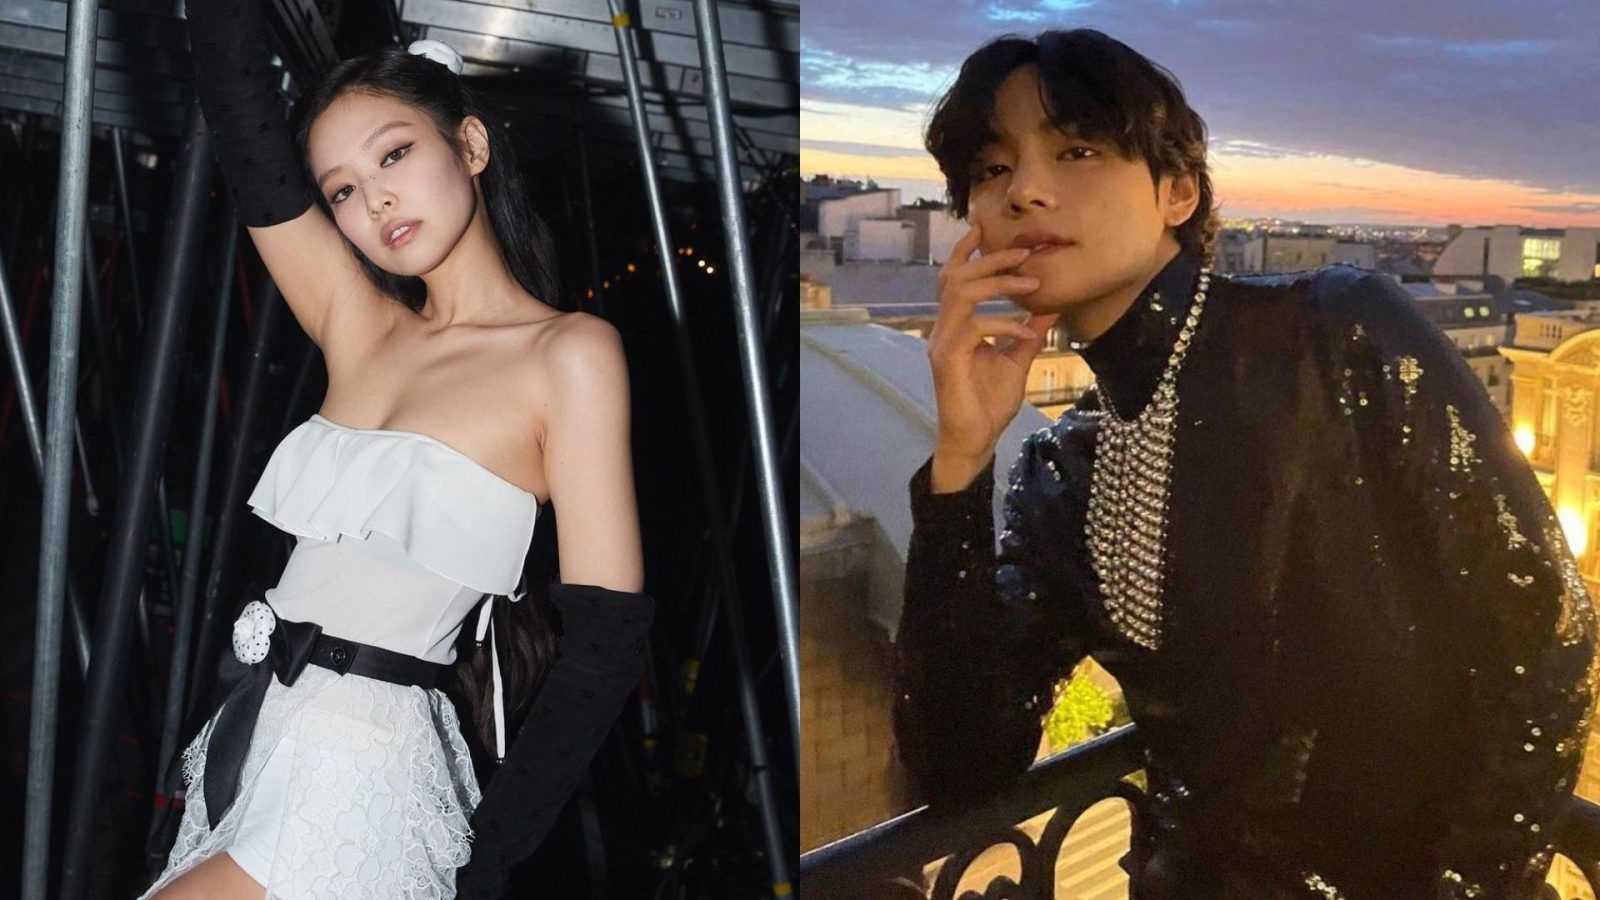 A timeline surrounding dating rumours of BLACKPINK's Jennie and BTS' V